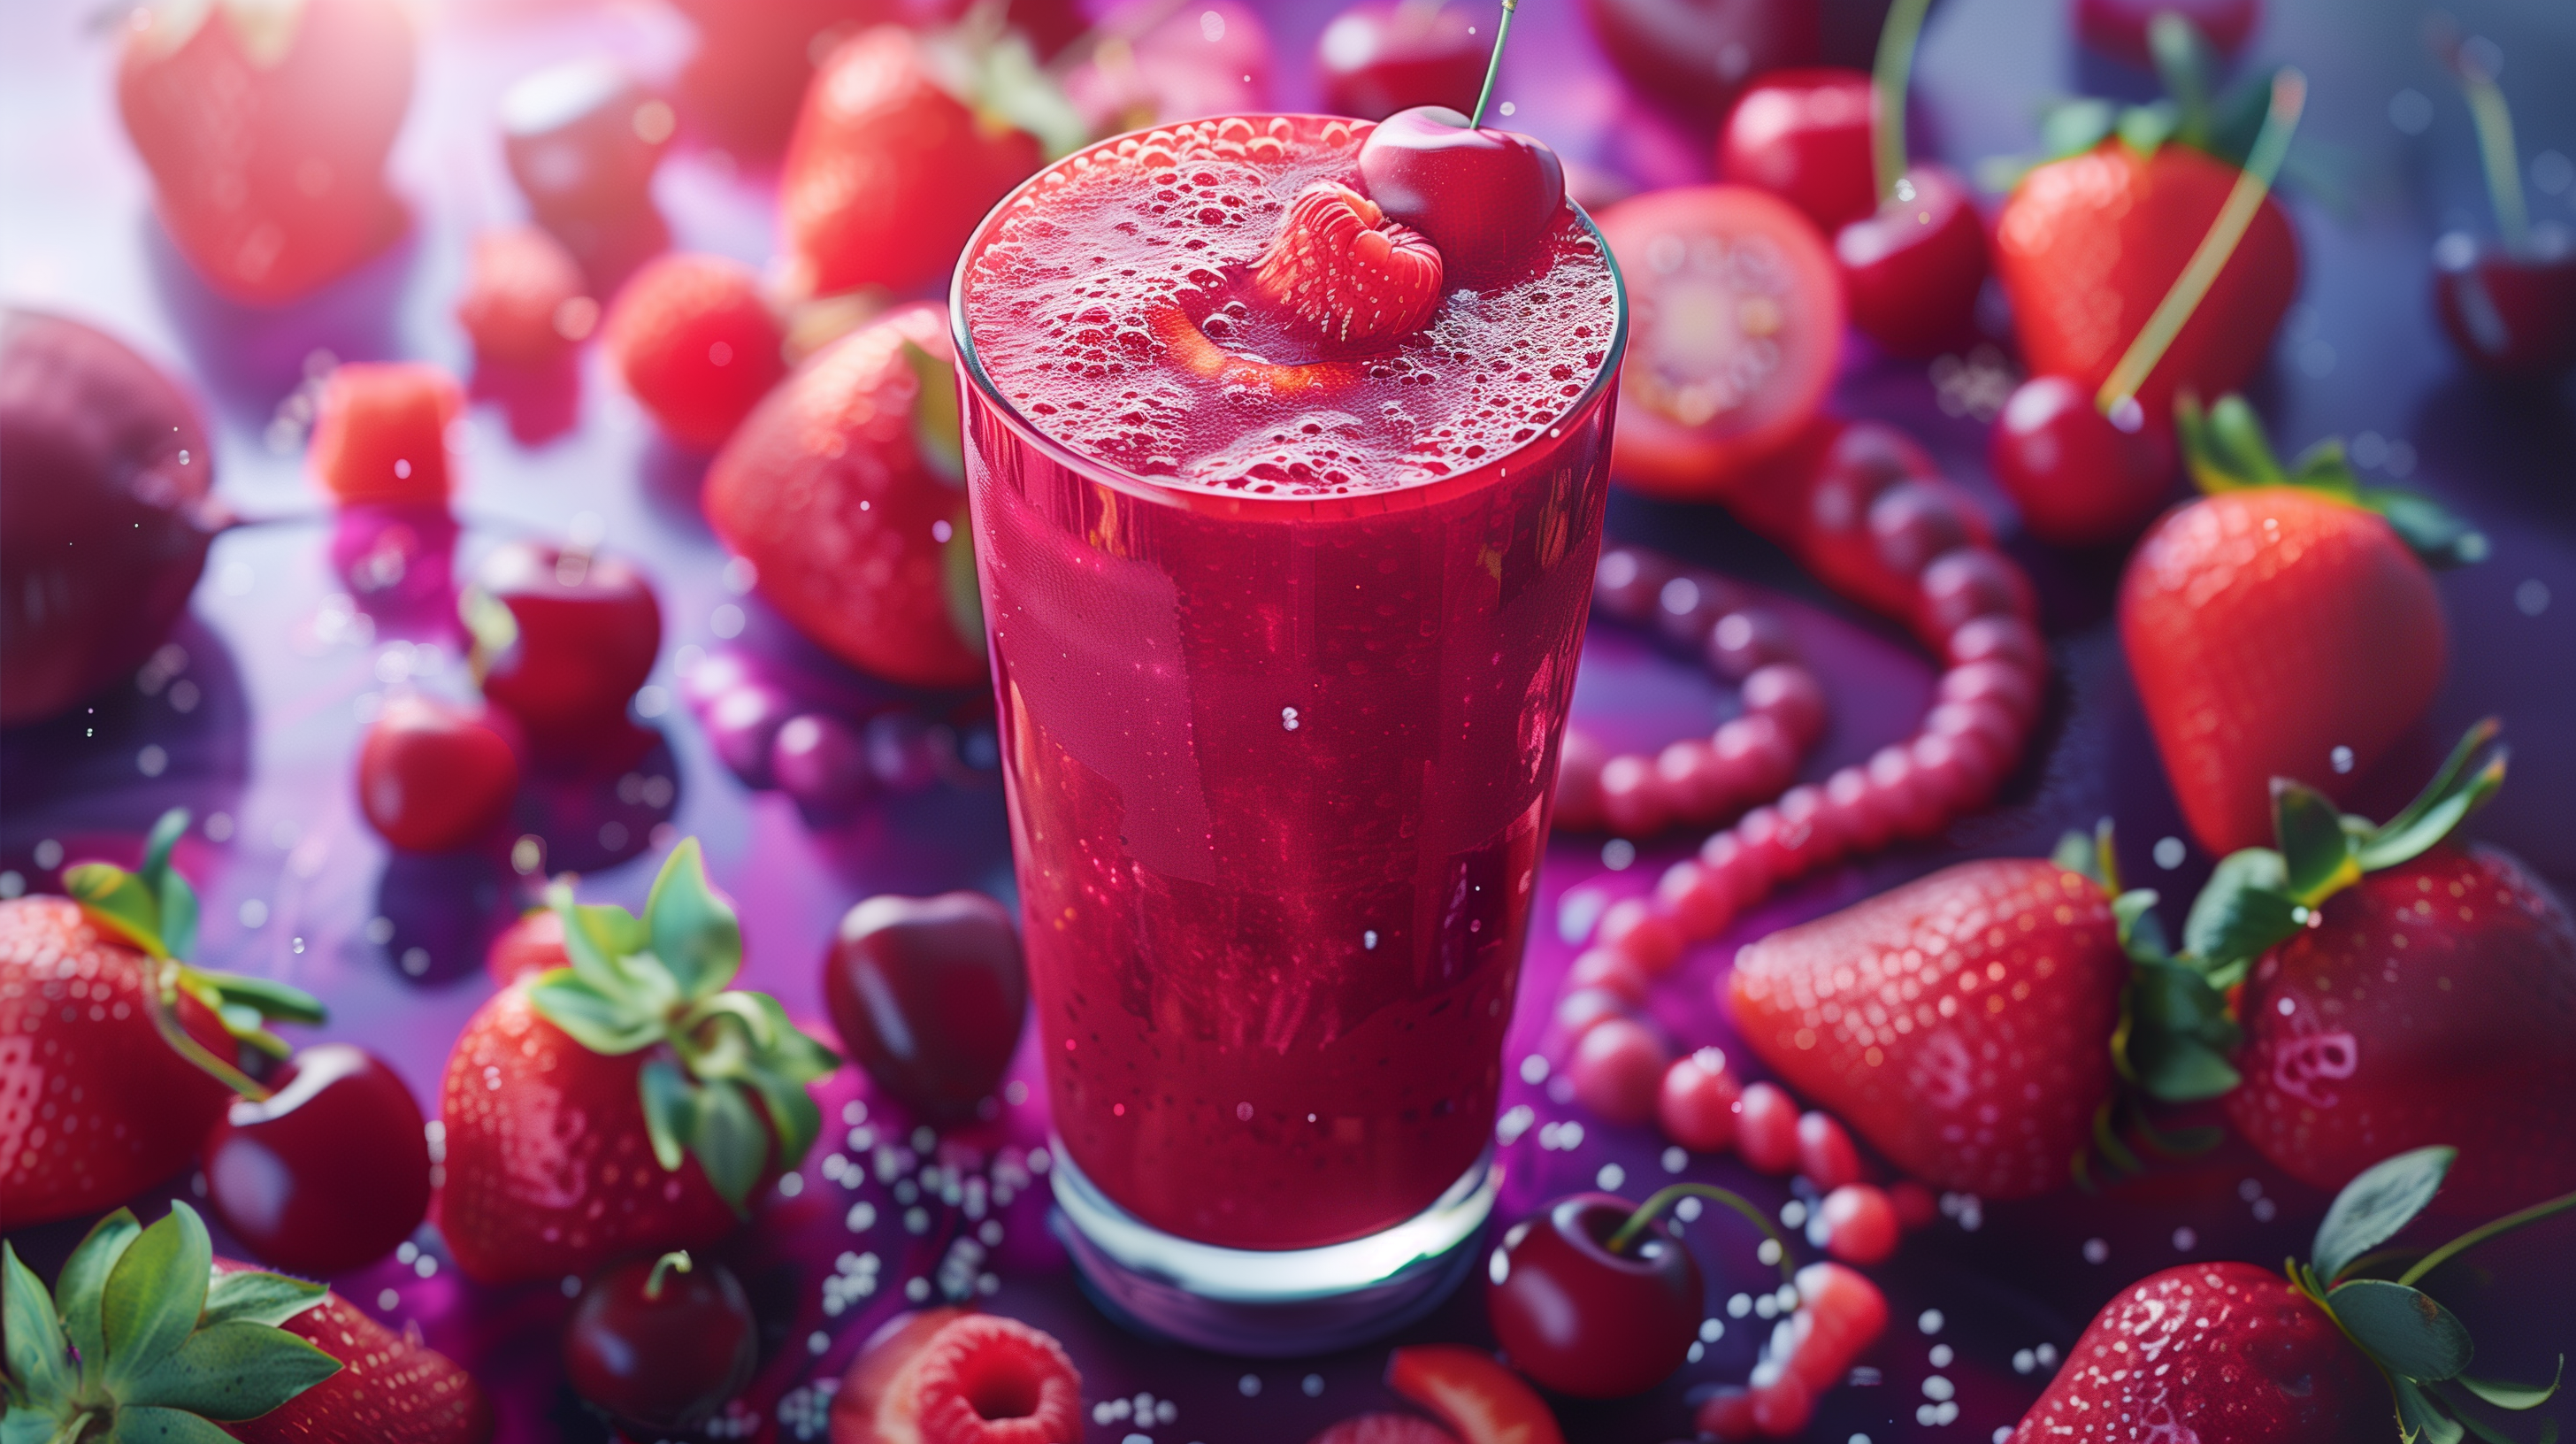 red smoothie surrounded by vibrant fruits like strawberries, cherries, and beets, with a healthy digestive system